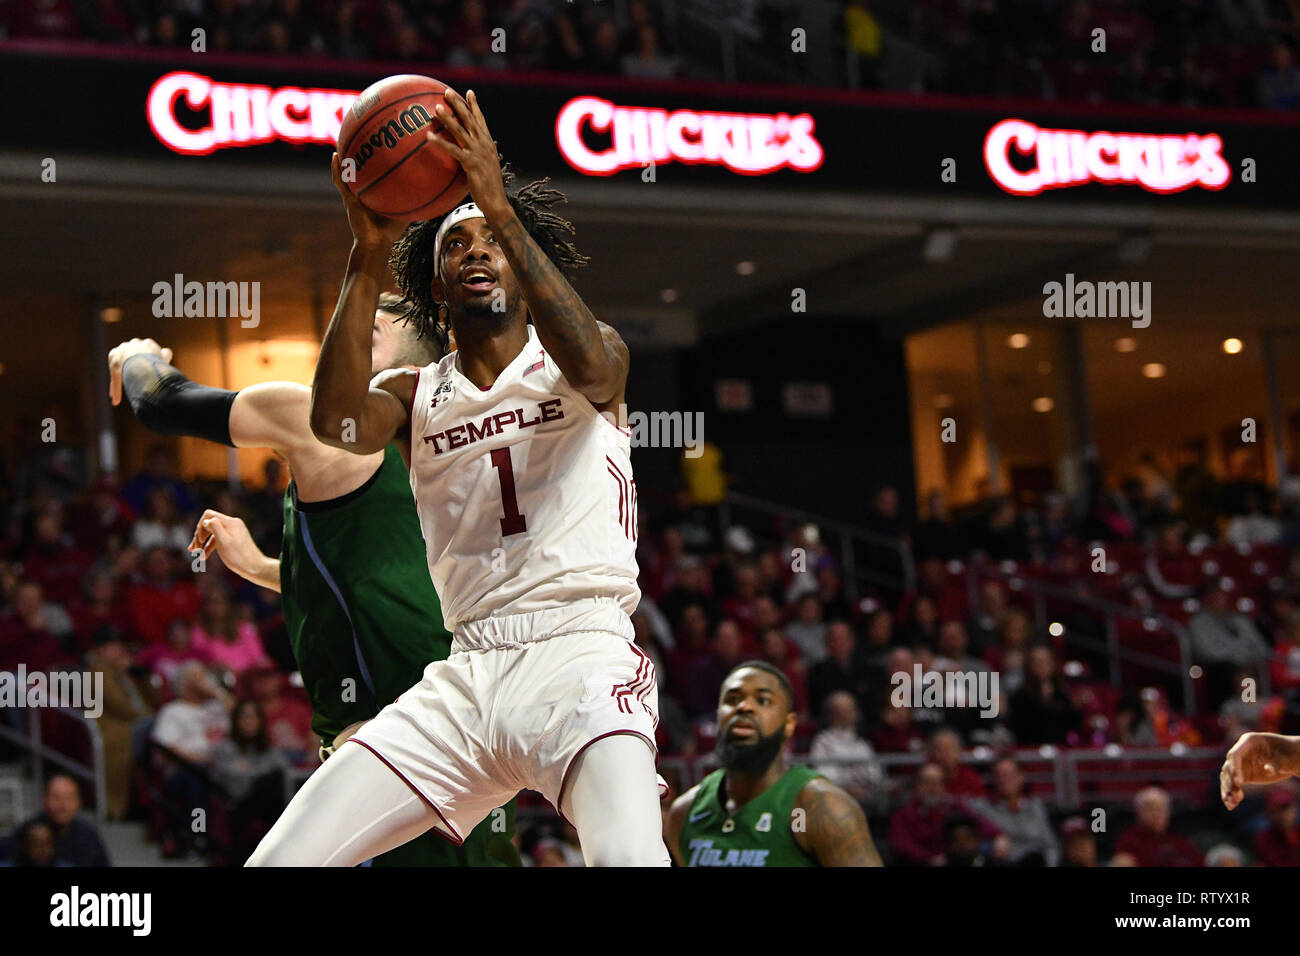 Philadelphia, Pennsylvania, USA. 3rd Mar, 2019. Temple Owls guard QUINTON ROSE (1) puts up a shot during the American Athletic Conference basketball game played at the Liacouras Center in Philadelphia. Credit: Ken Inness/ZUMA Wire/Alamy Live News Stock Photo